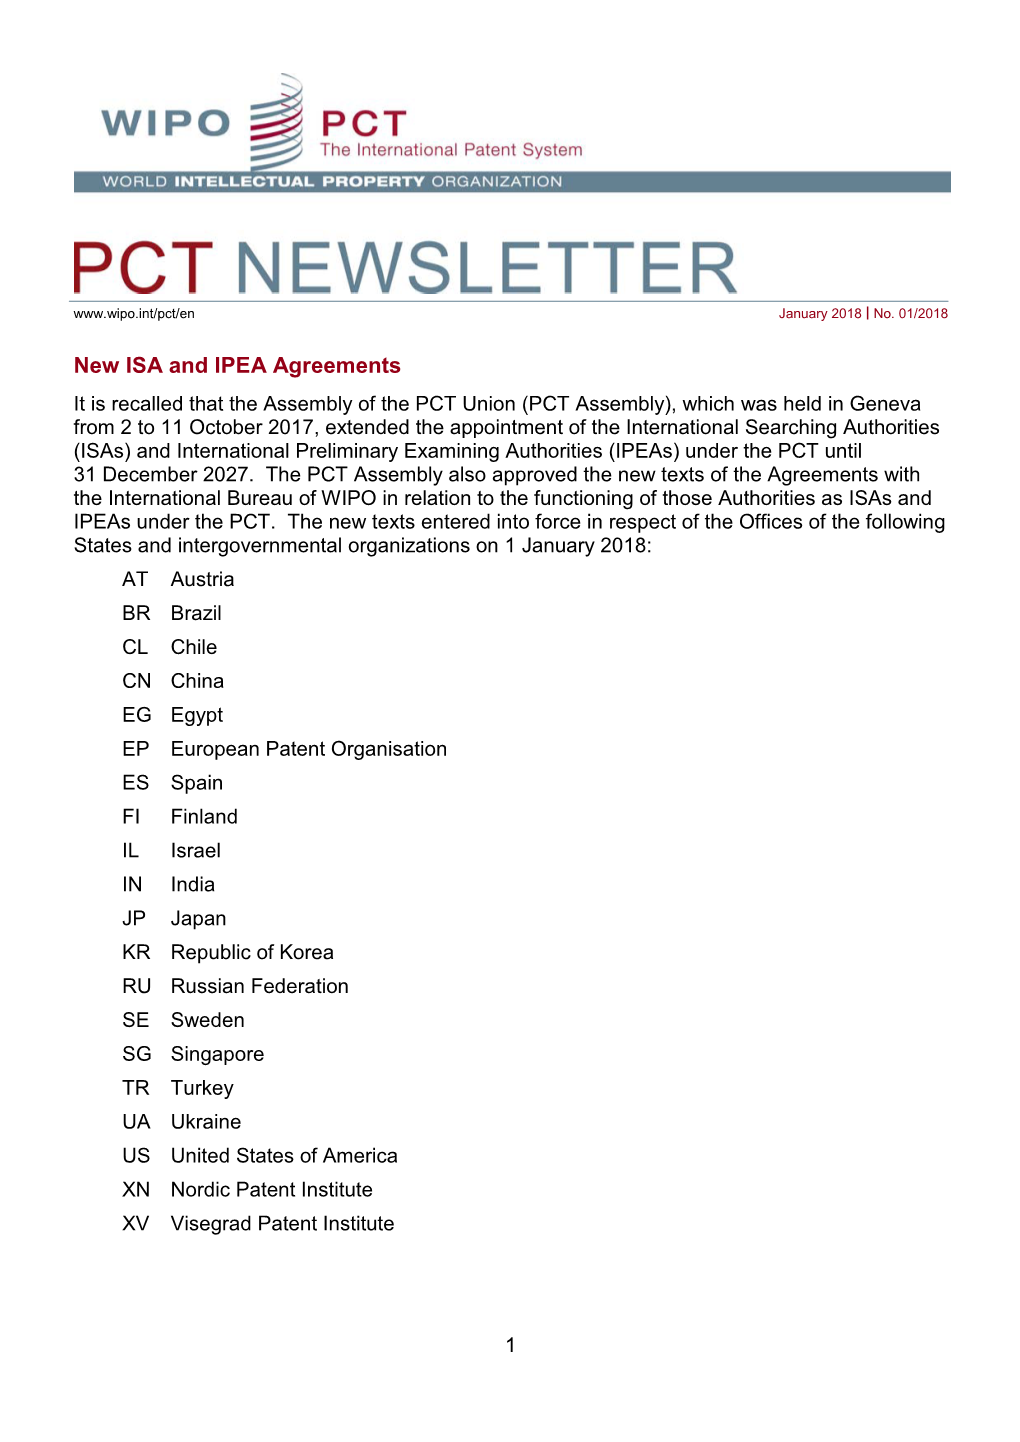 PCT NEWSLETTER | January 2018 | No. 01/2018